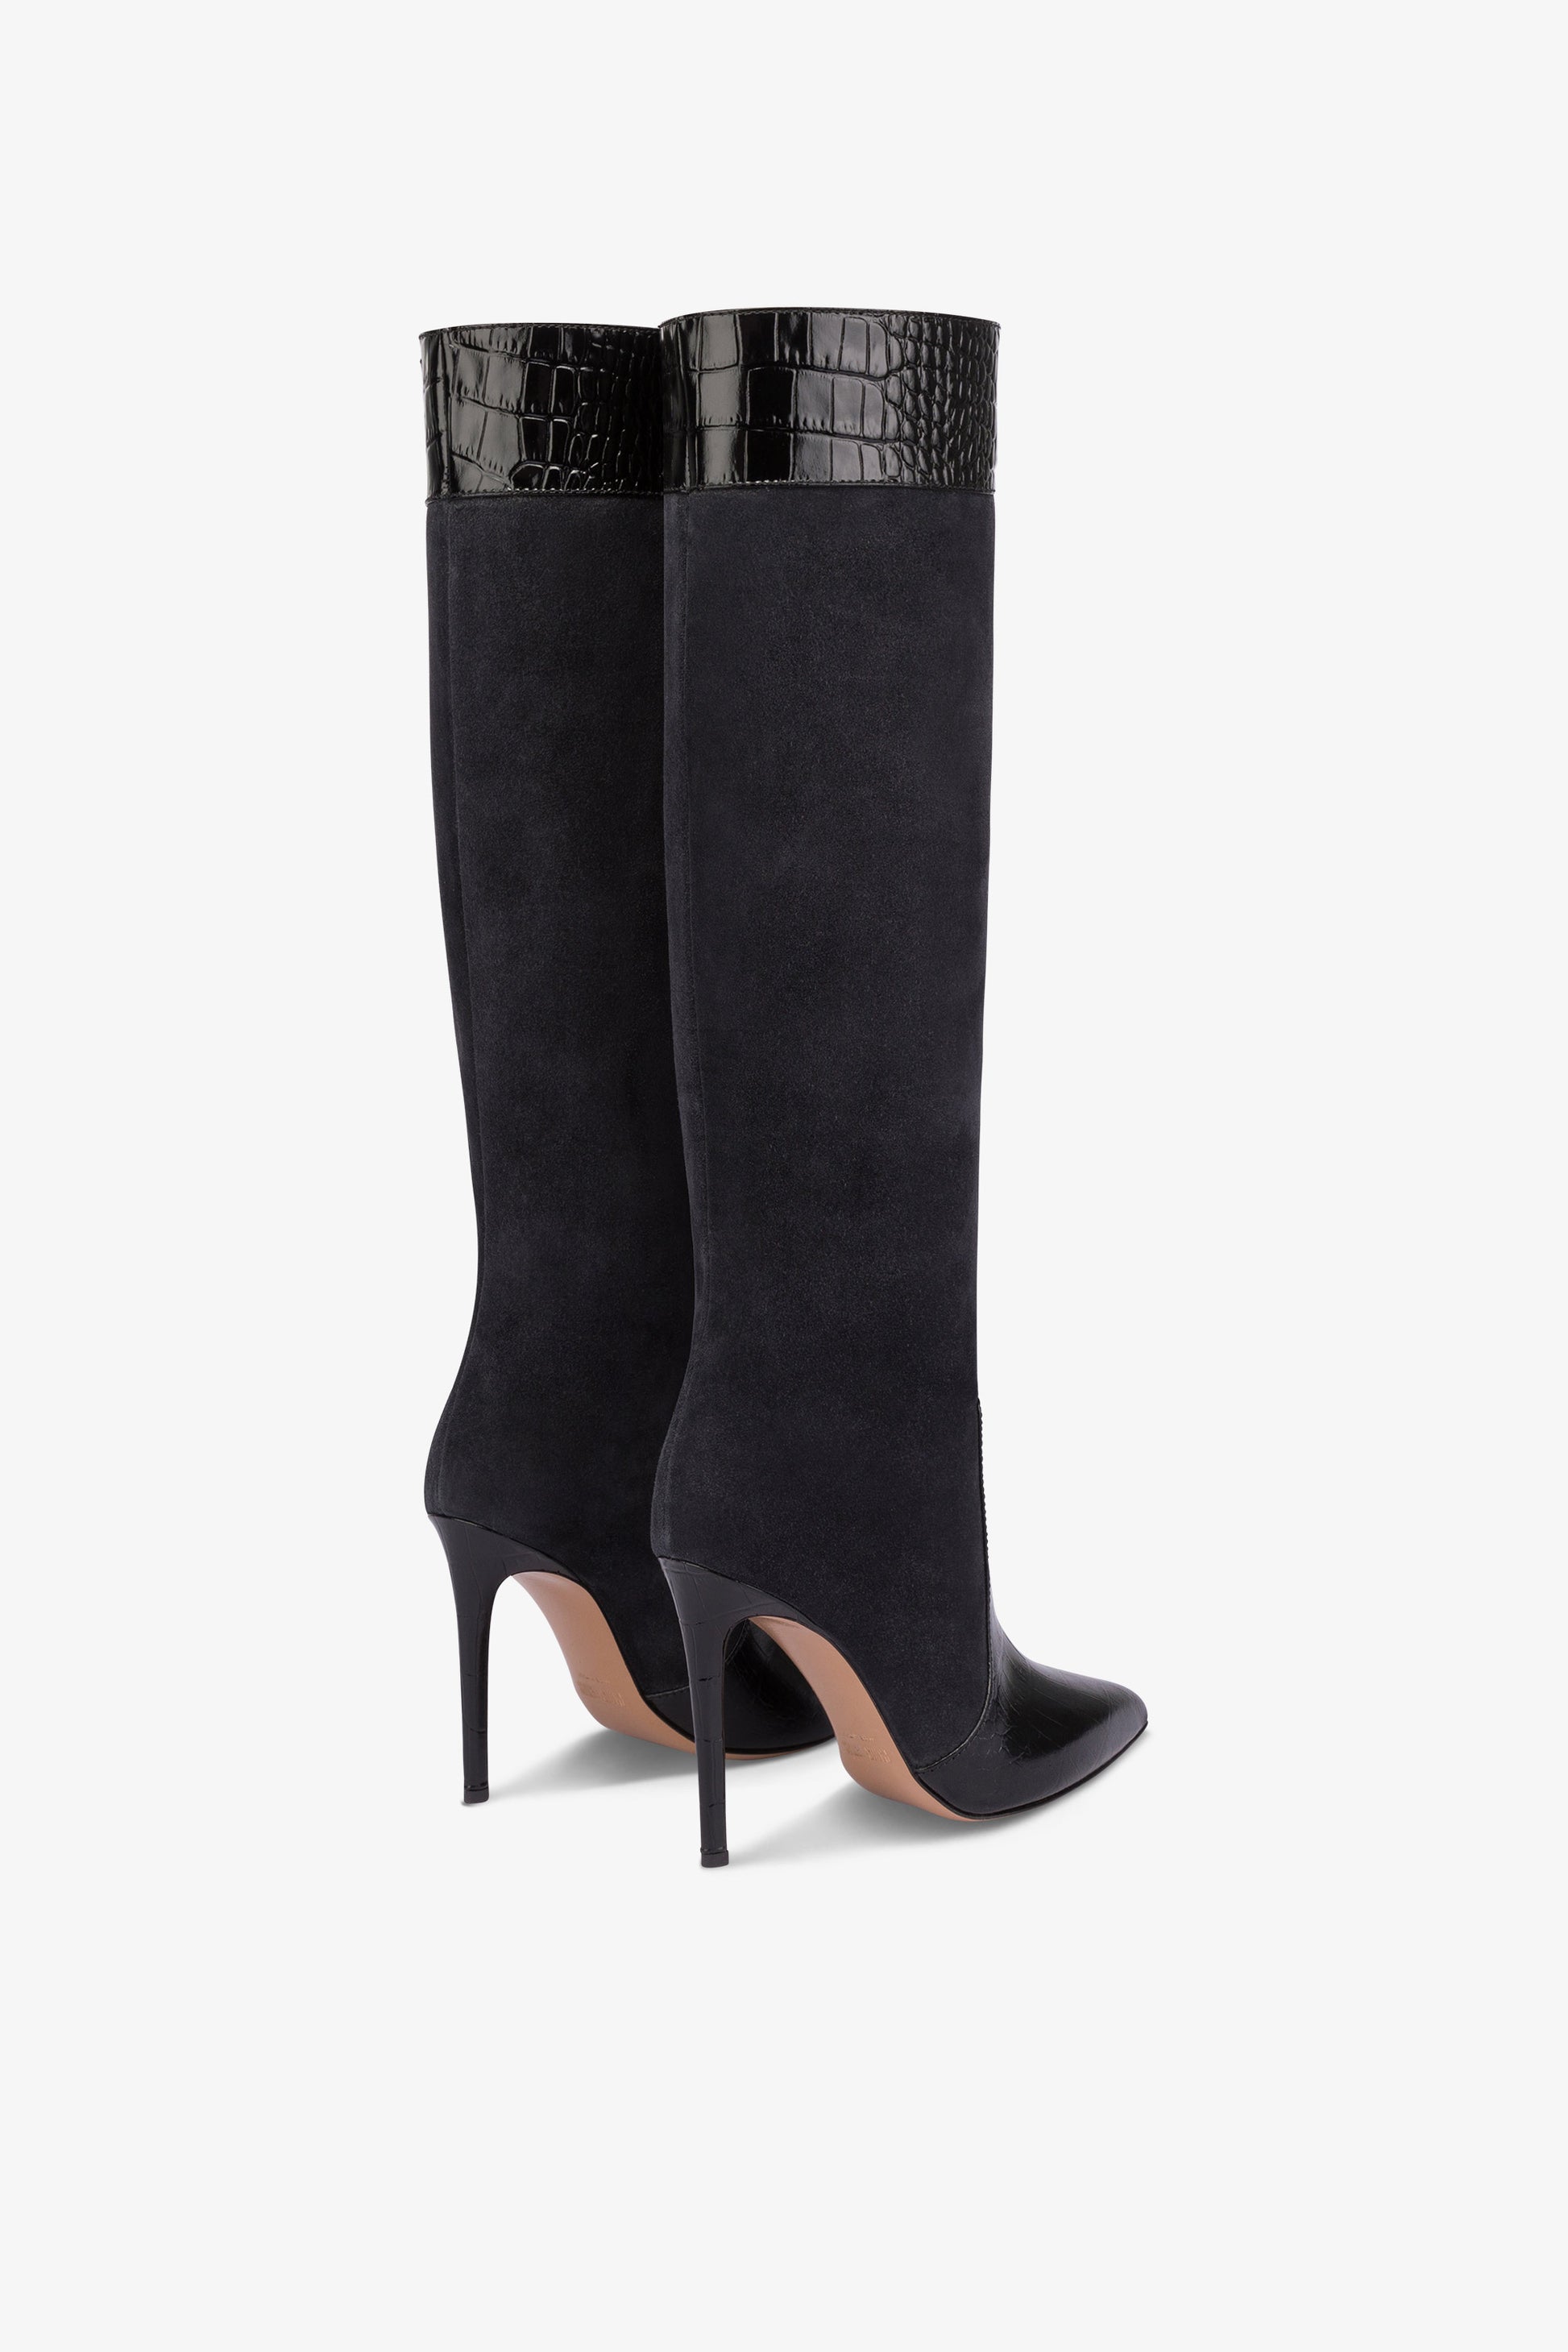 Pointed boots in black and off-black suede and soft croco-embossed leather